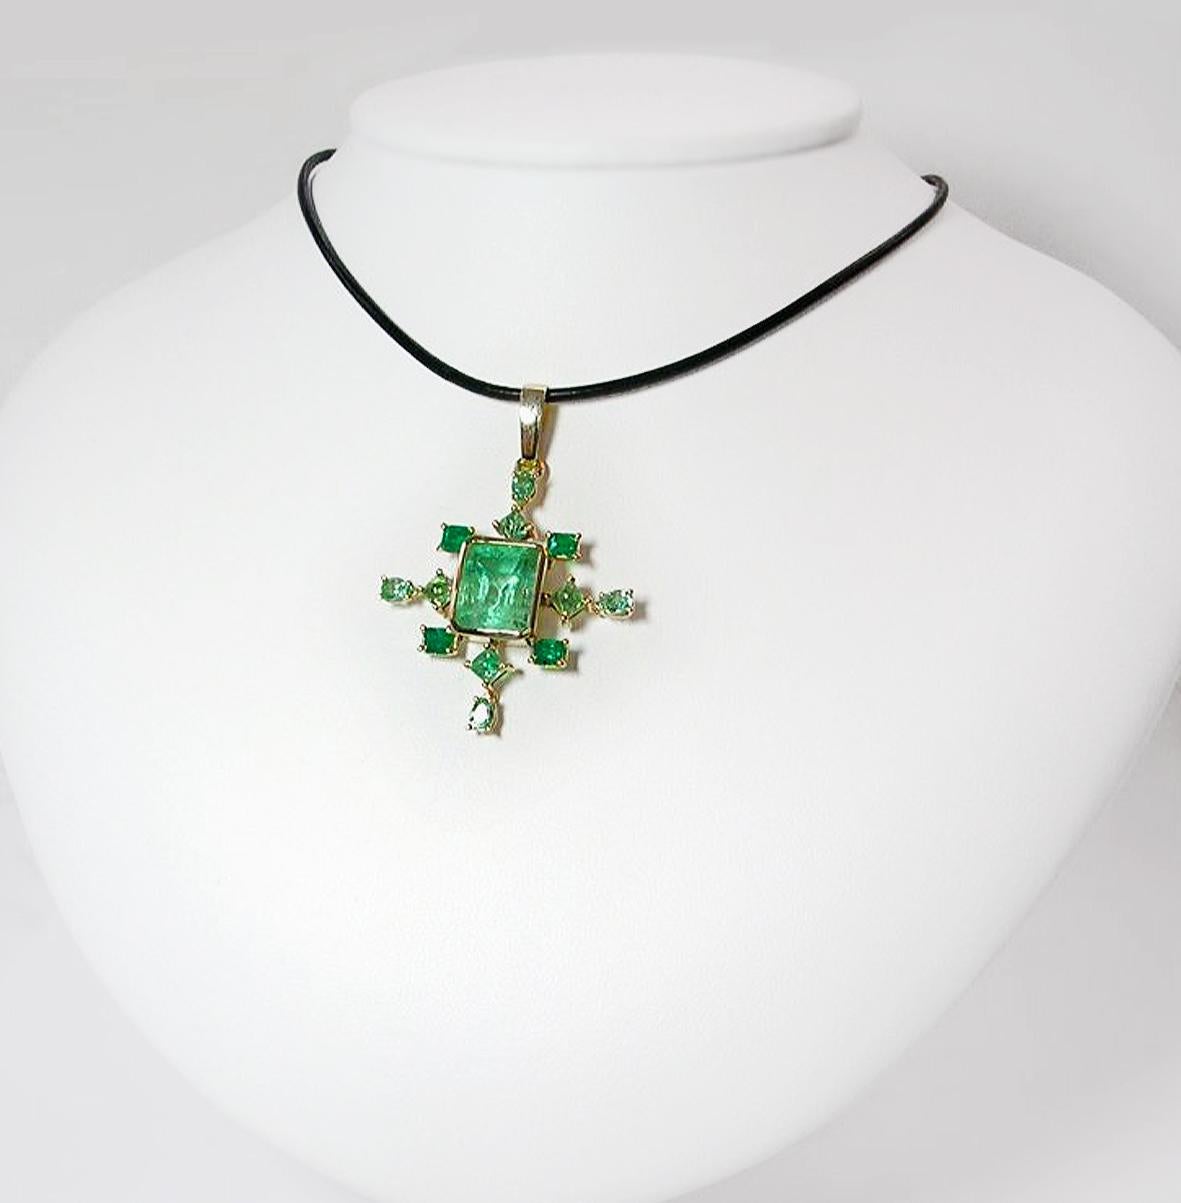 This amazing 7.40ct antique-style cluster drop pendant, is made of 14K yellow gold. The center feature a natural 5.0ct 100% natural Colombian emerald, light green color. This beautiful emerald is surrounded with 12 Sparkling emeralds weighing 2.4ct.